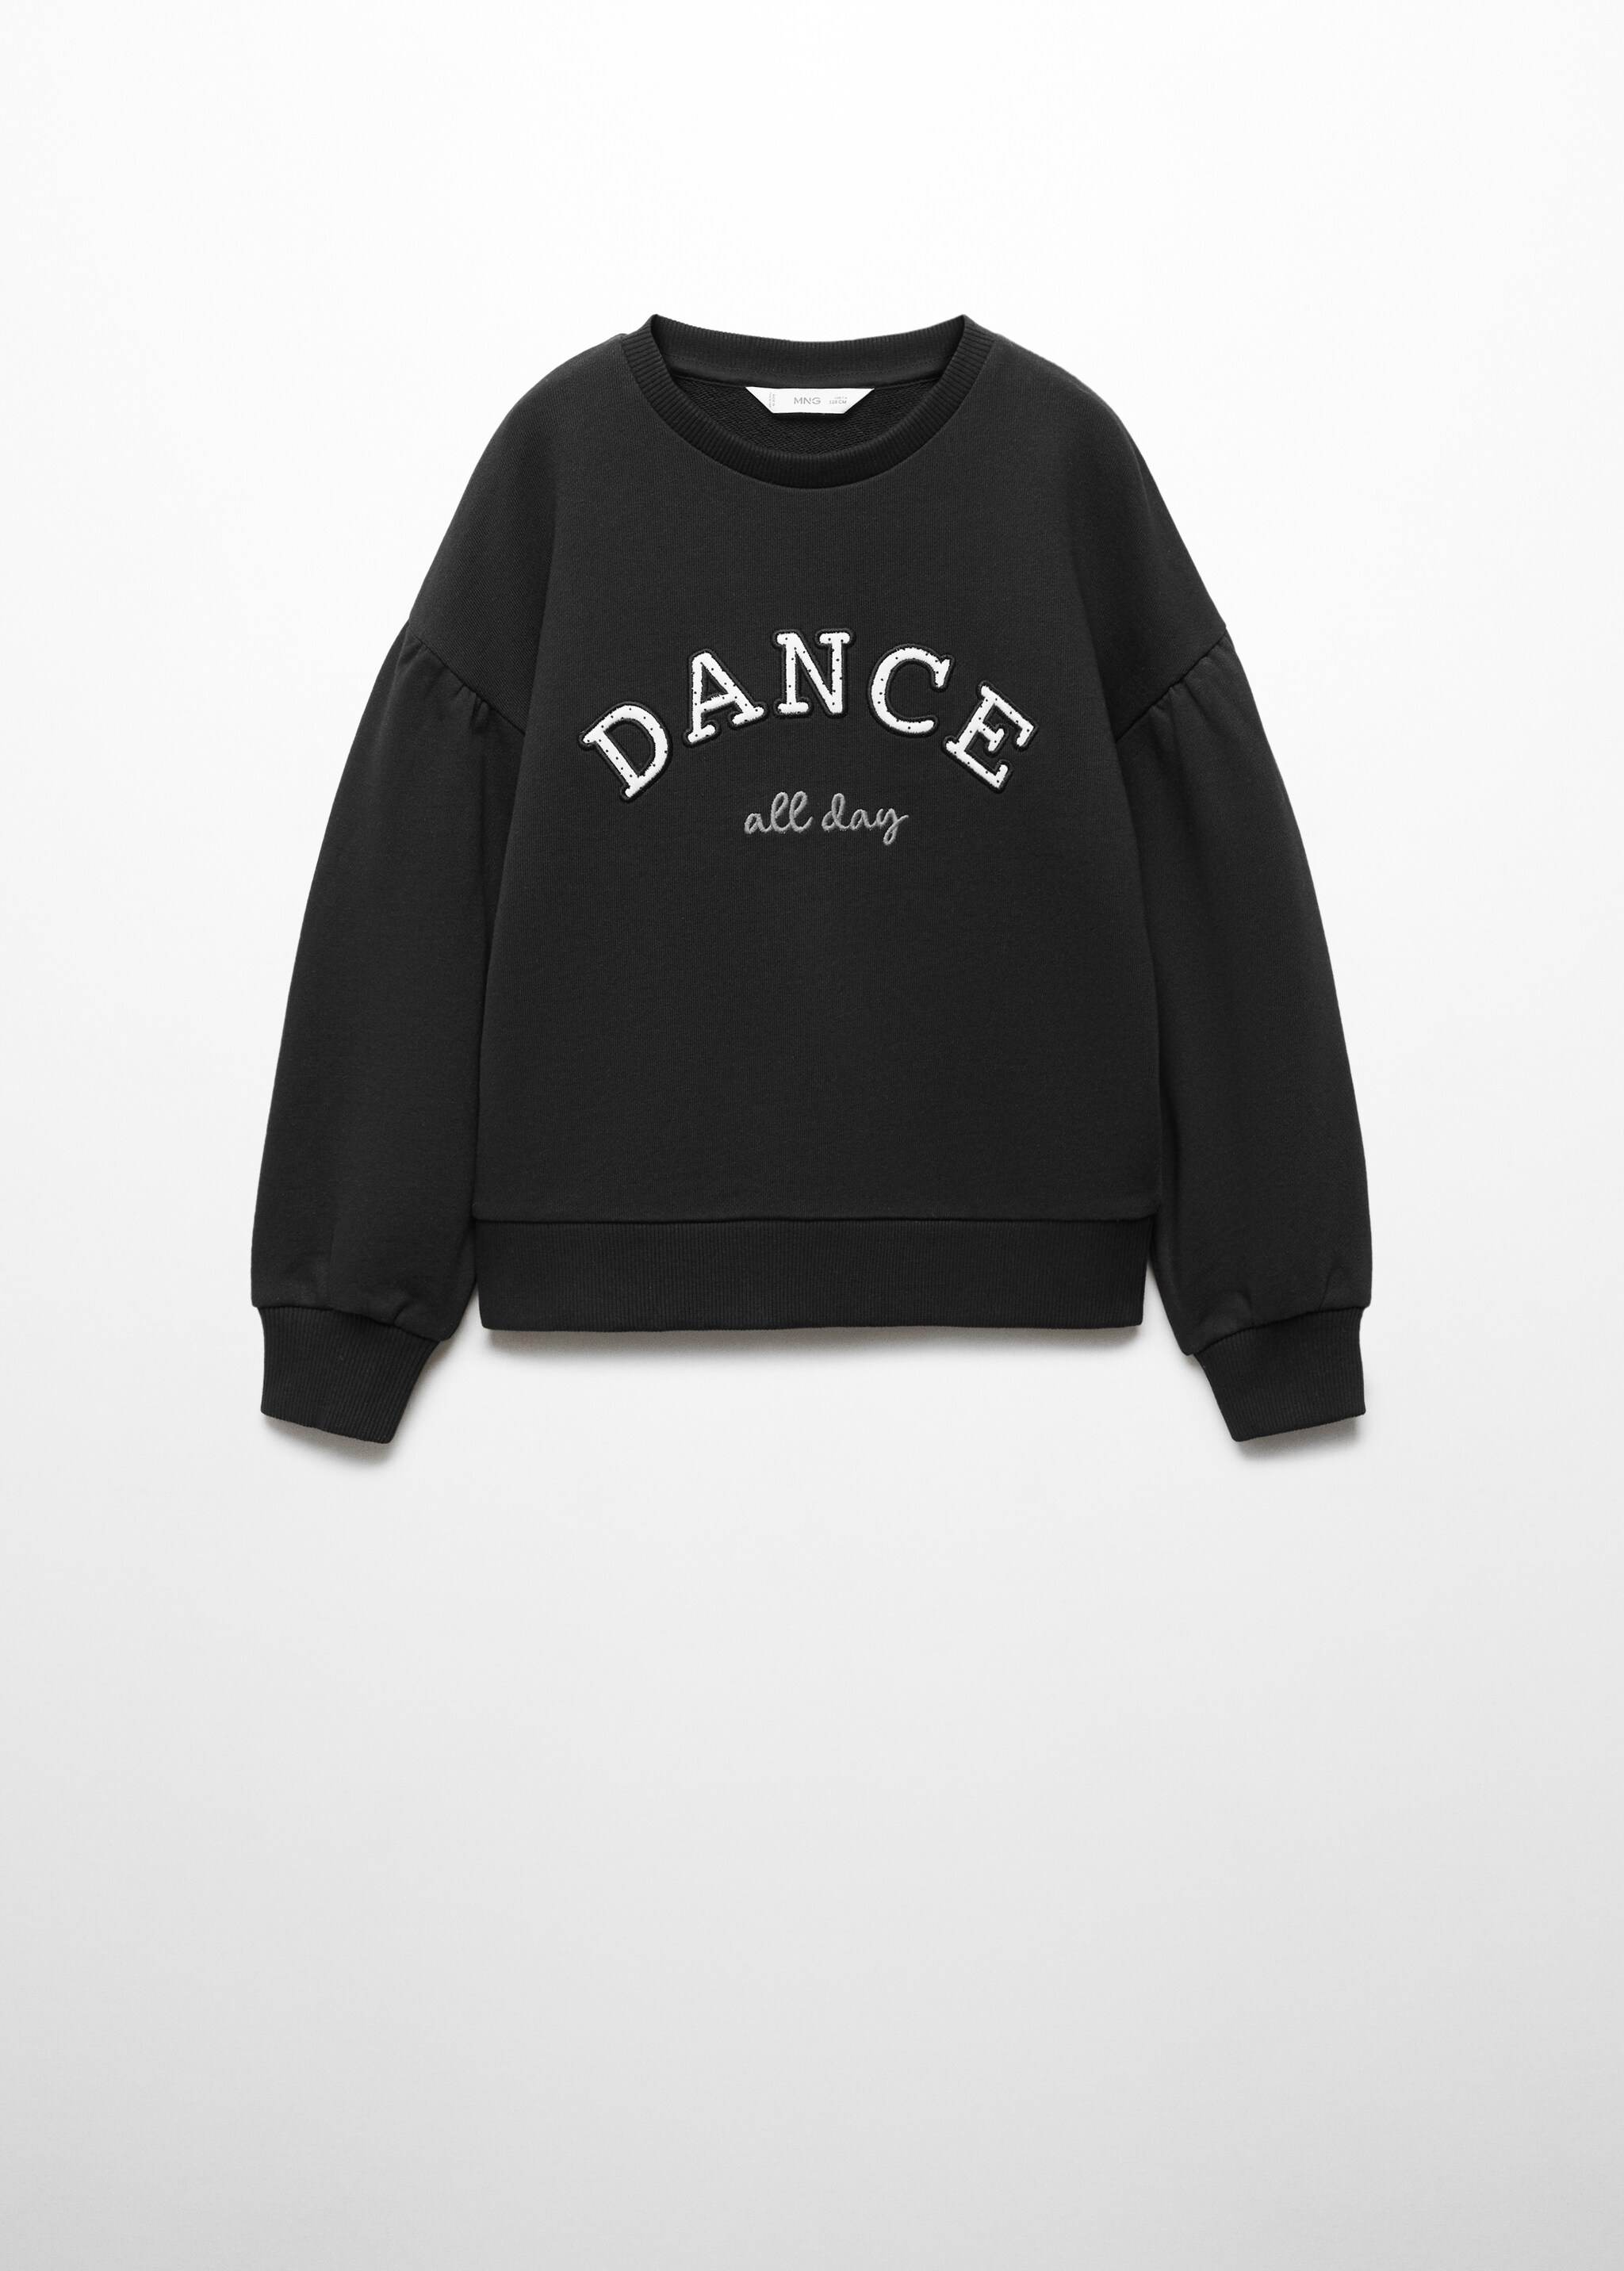 Embossed message sweatshirt - Article without model